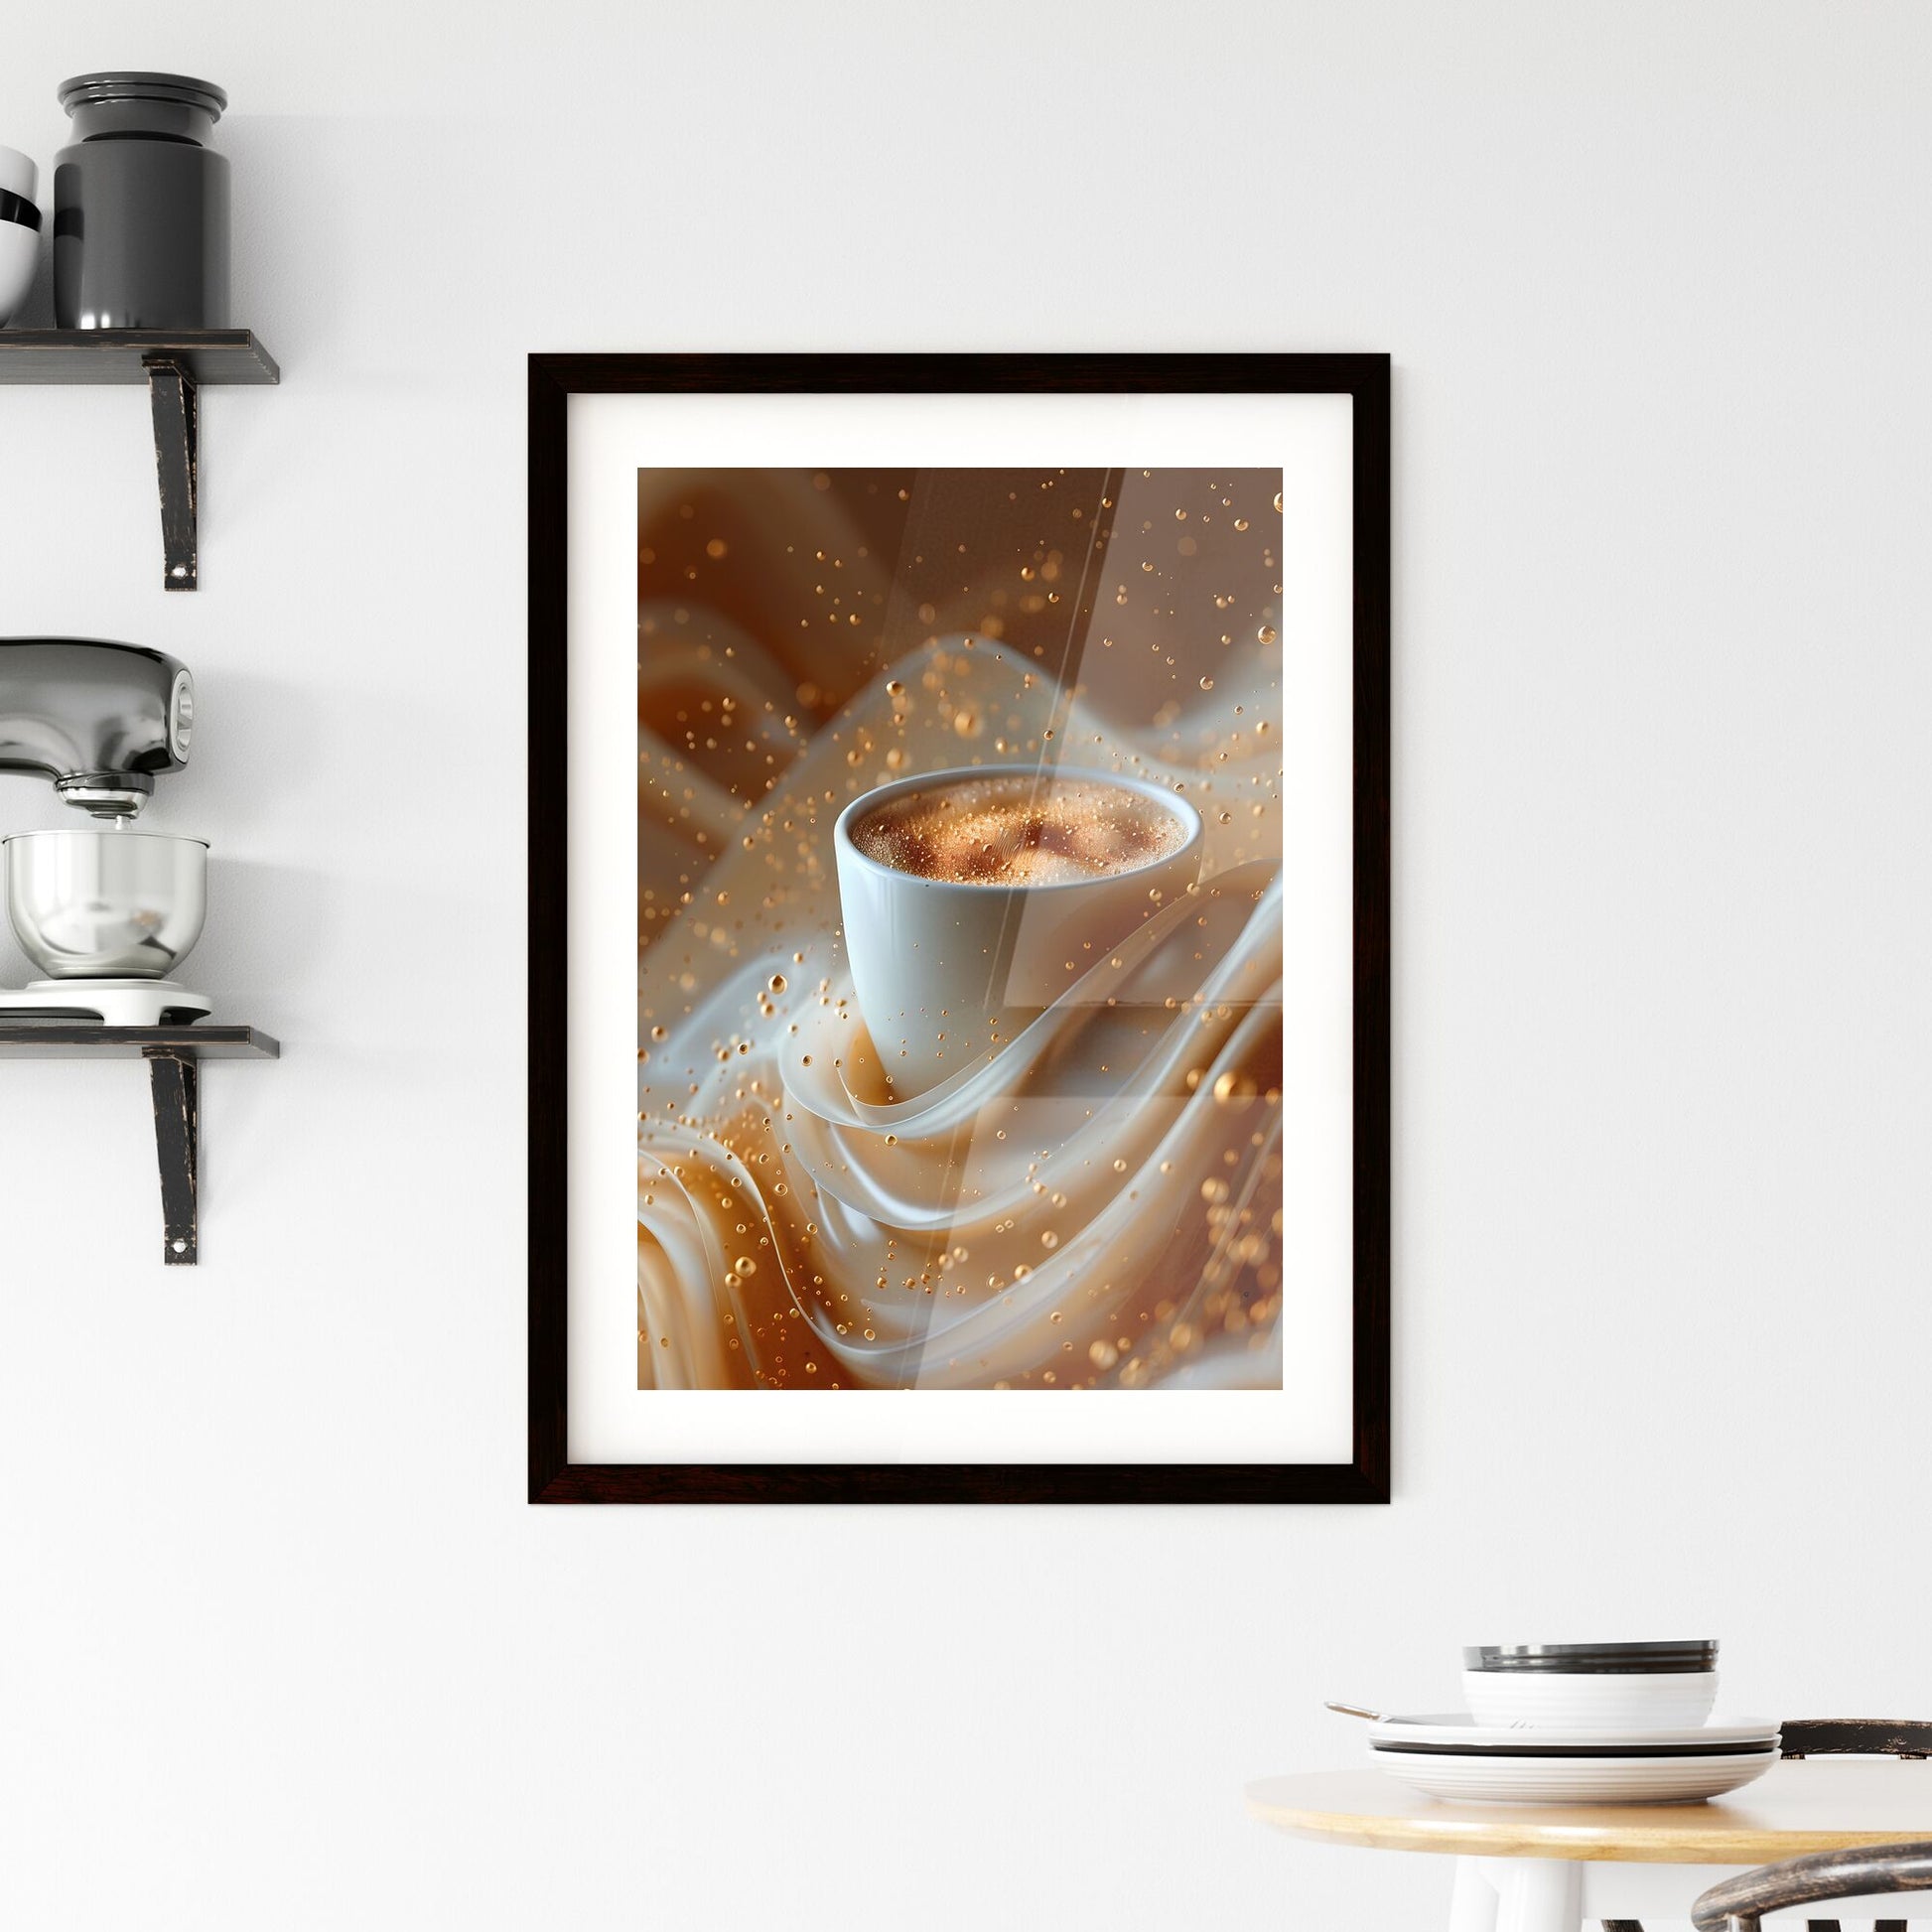 Close-up Photograph of a Hyper-Realistic, Vibrant Coffee and Fabric Swirl Painting in a Surrealist Style with Smooth Textures and Vibrant Colors Default Title